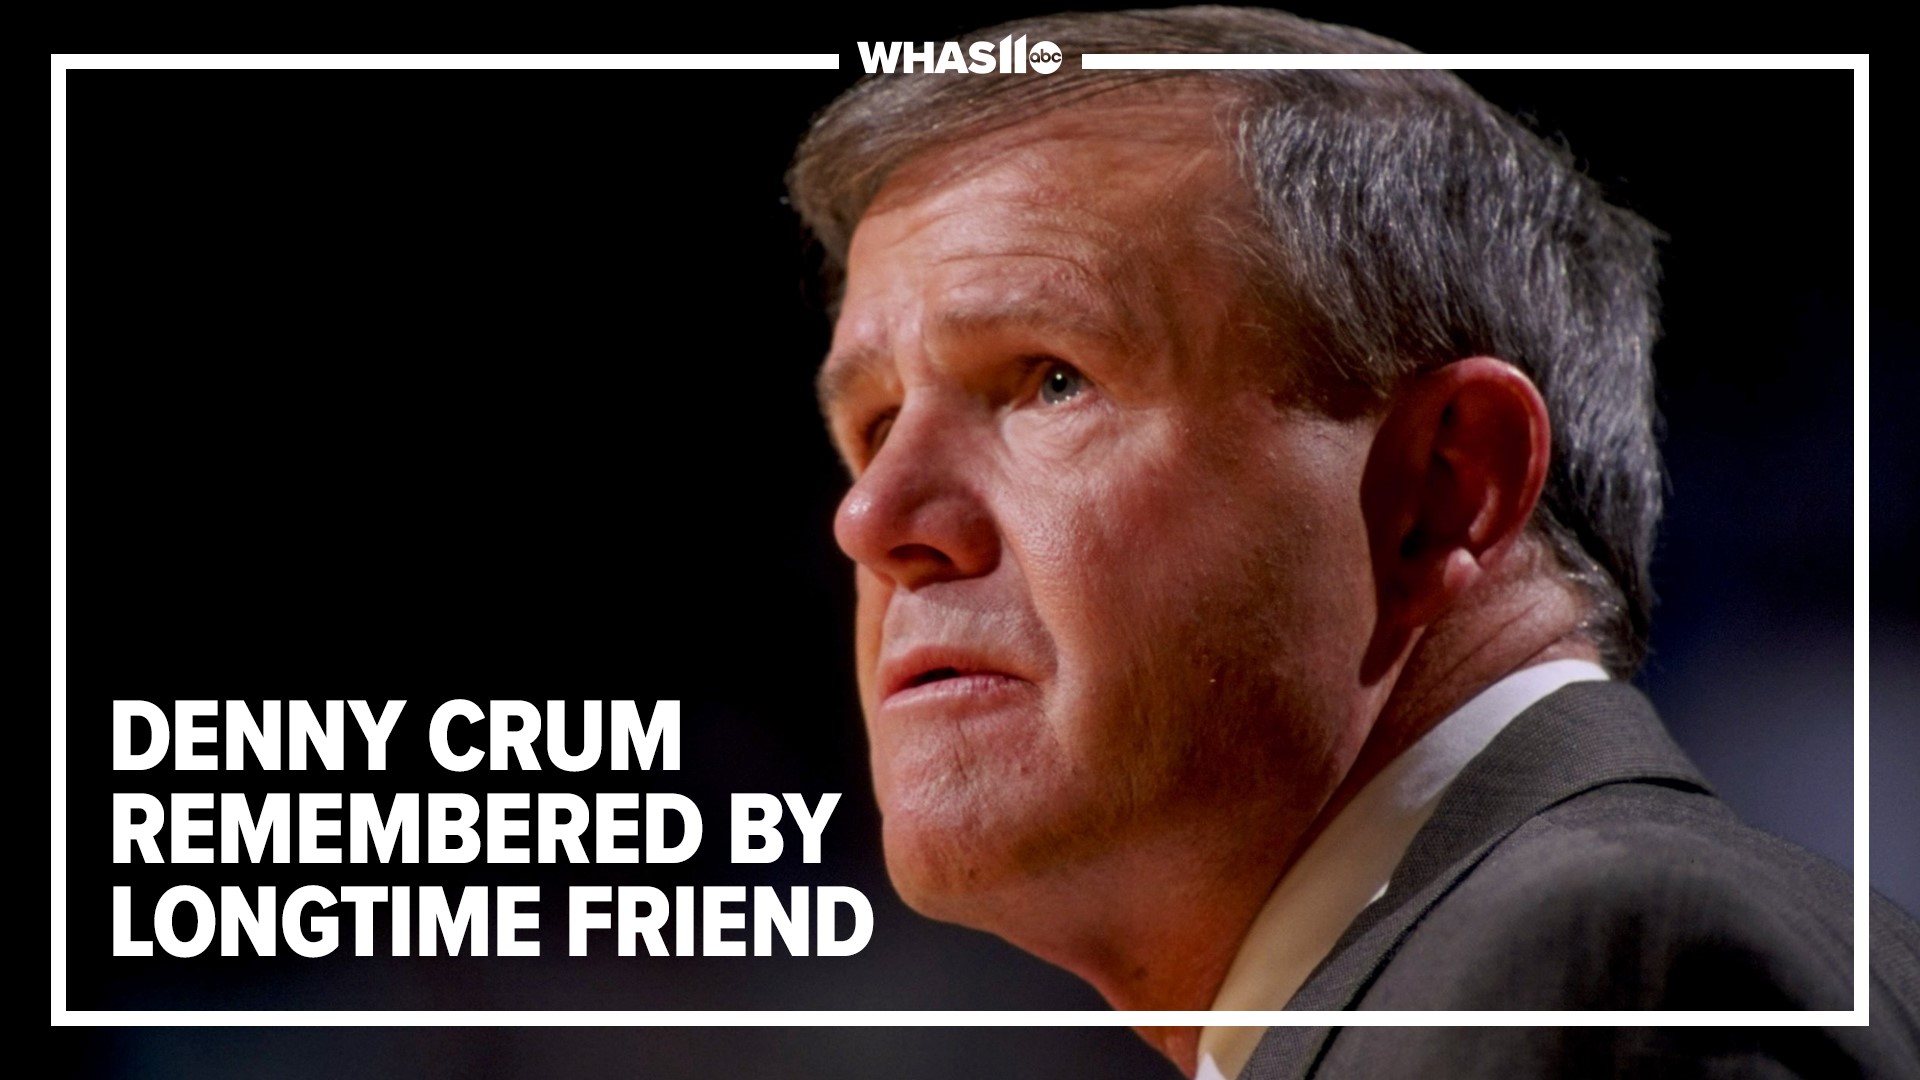 WHAS-TV and Radio legend Van Vance covered Crum from the beginning of his coaching career in Louisville down their longtime friendship.